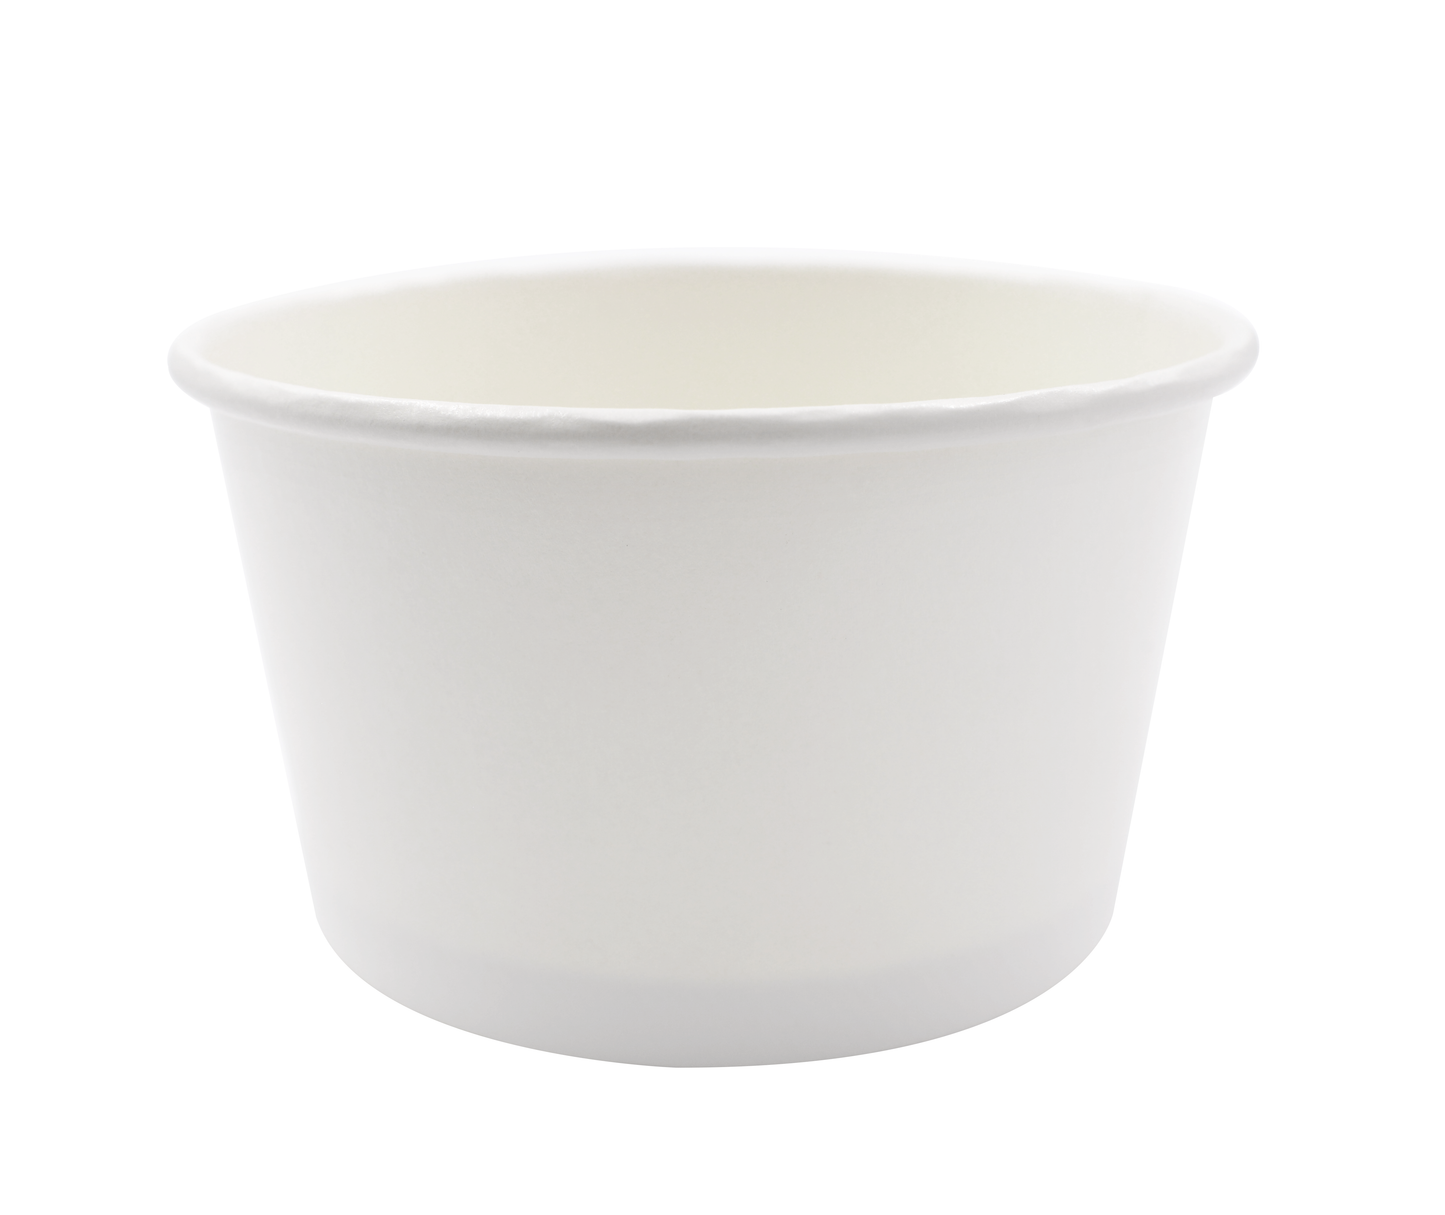 120-001-012 White Paper Soup/Food Container 12oz.